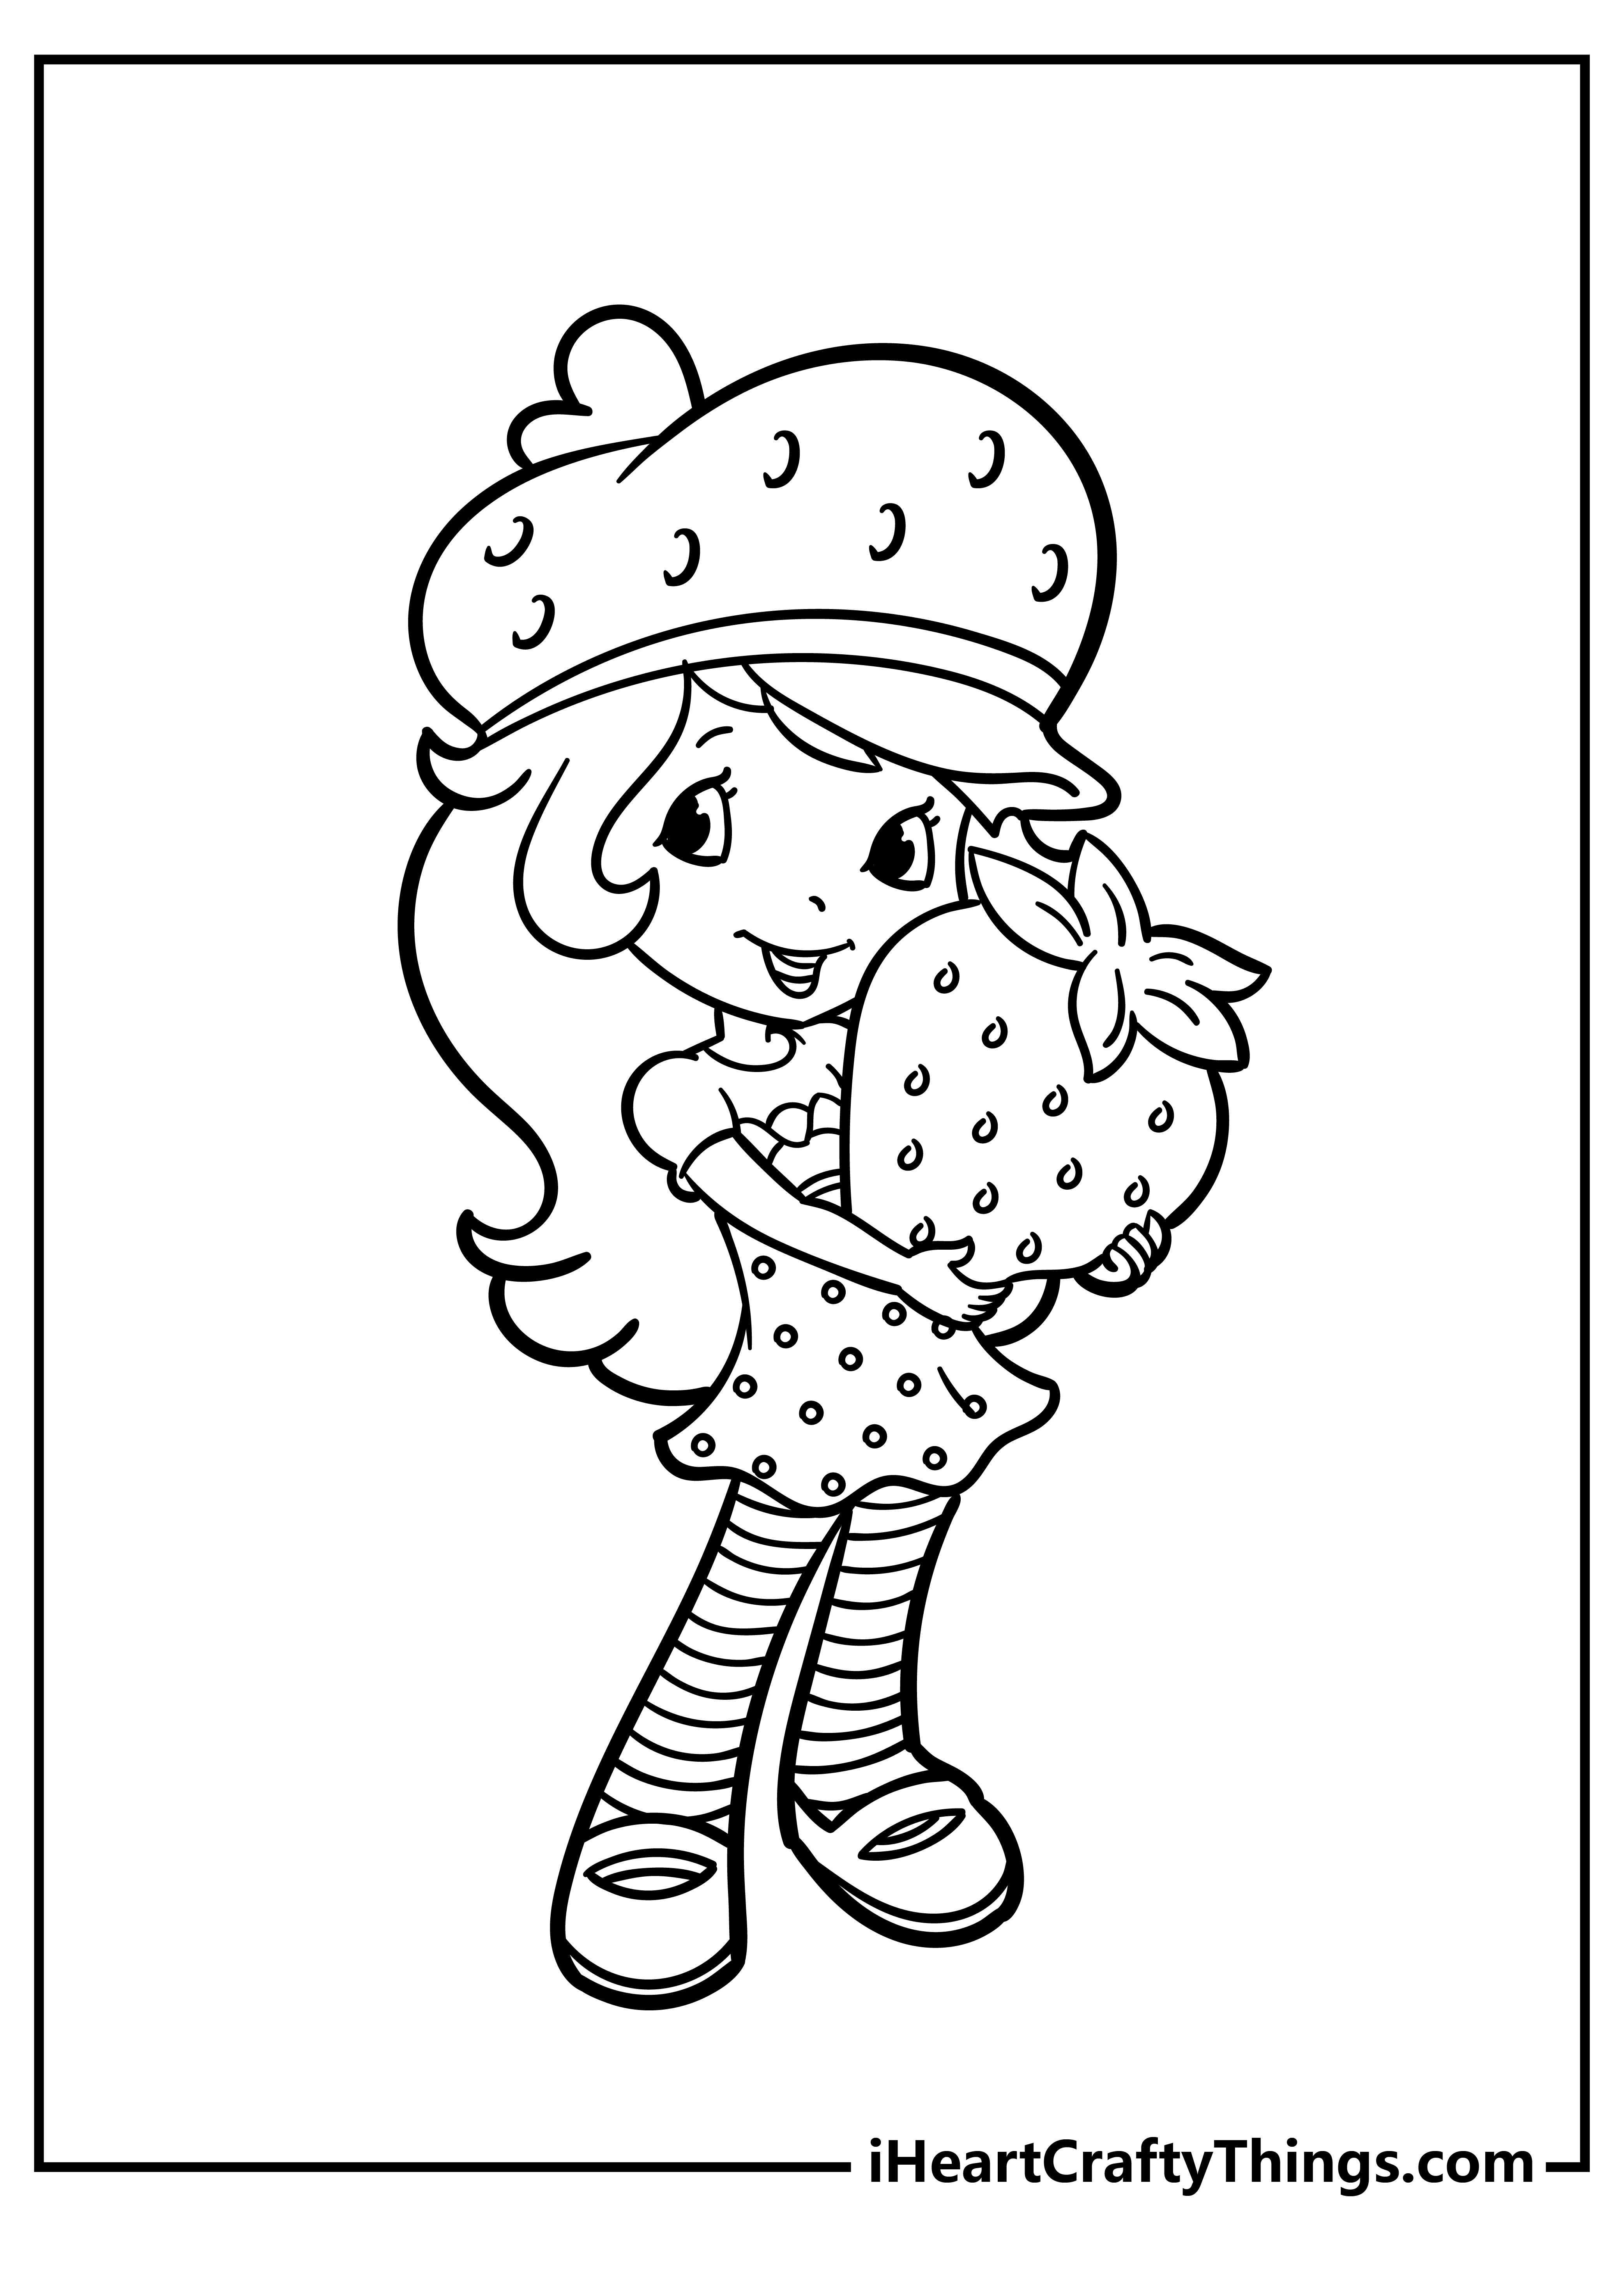 Coloring pages strawberry shortcake